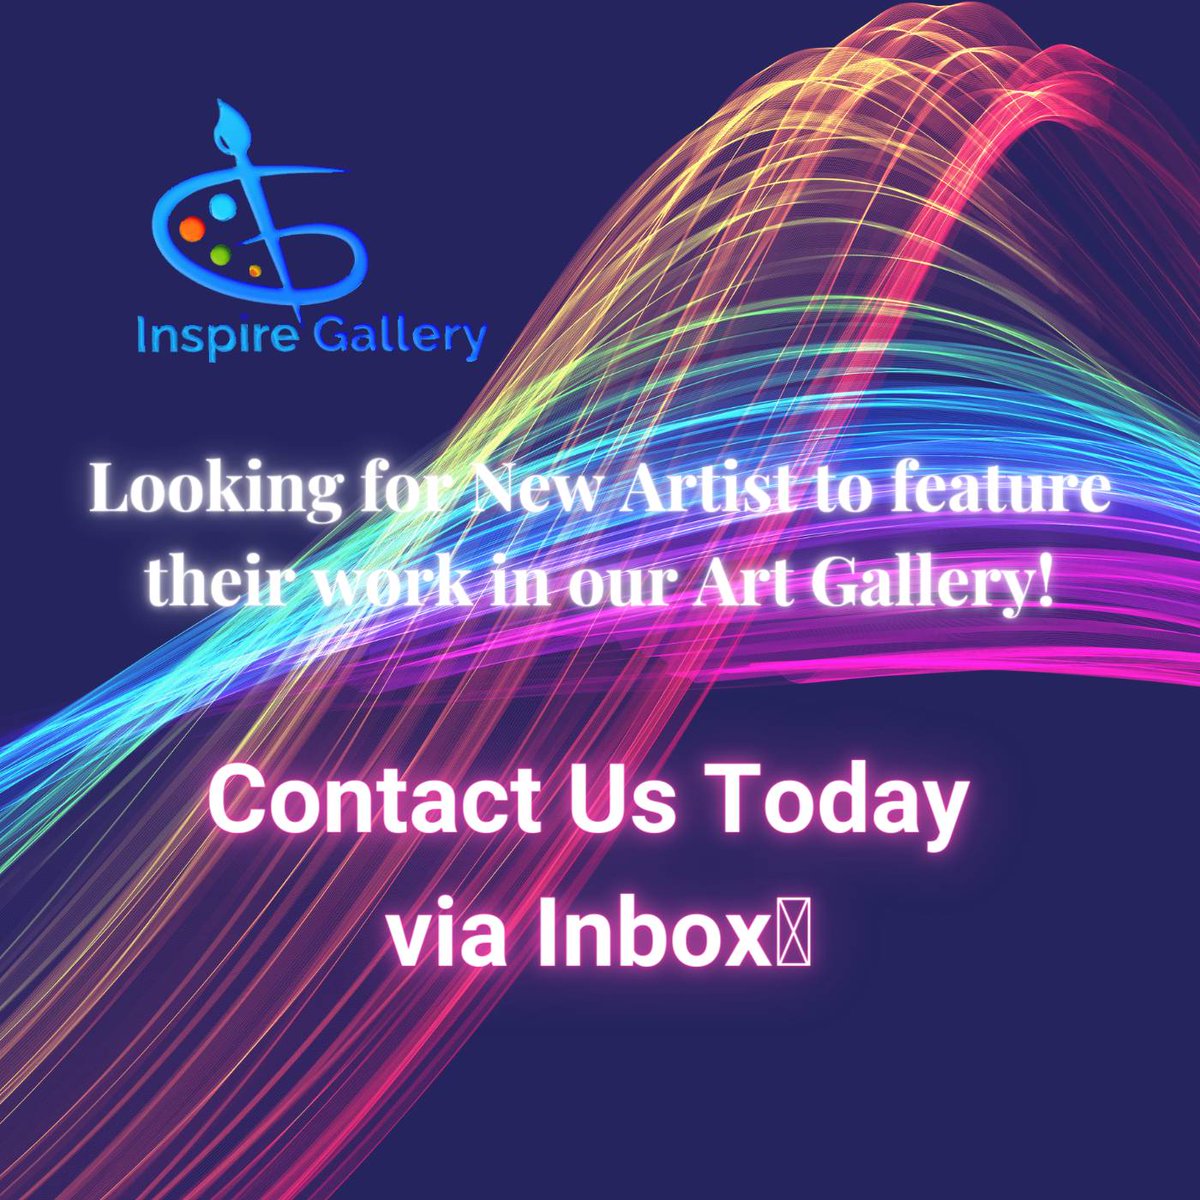 Artists Wanted! 🎨 Submit your work now to Inspire Gallery in Salisbury, MD. #ArtLovers #ArtistCall #SalisburyMD #SupportLocalArtists #CreativeExpression #ArtGallery #inspiregallery #inspirecafedeli #inspireone